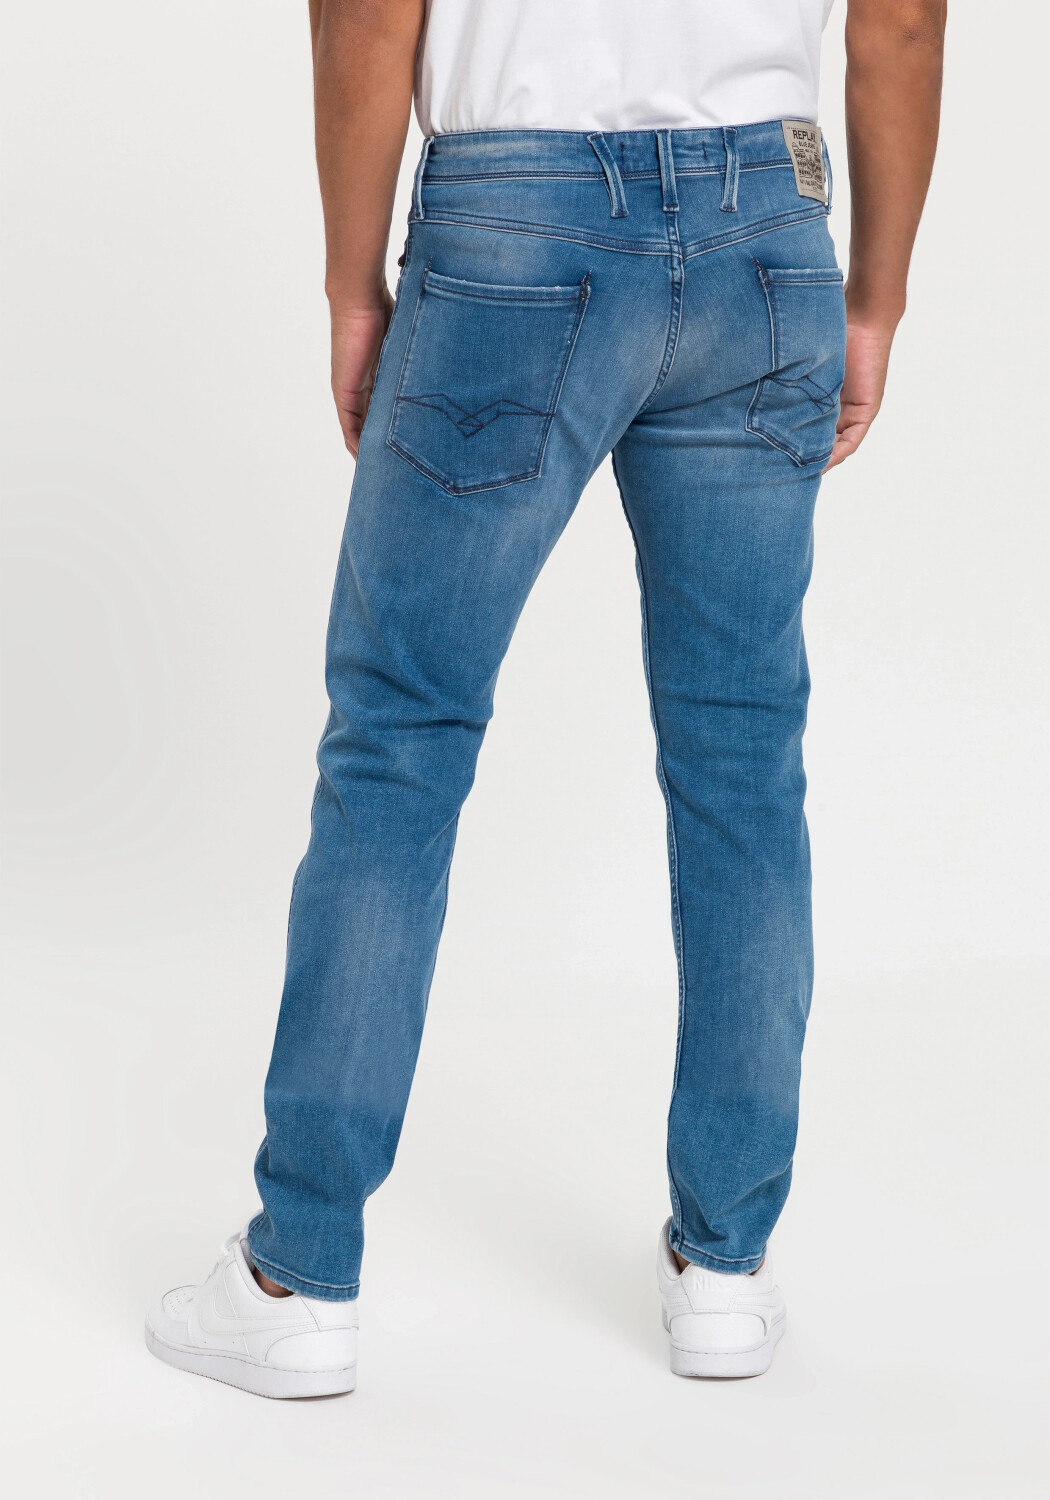 Buy Replay Anbass Hyperflex Slim Fit Jeans light blue (BF5) from £48.27  (Today) – Best Deals on